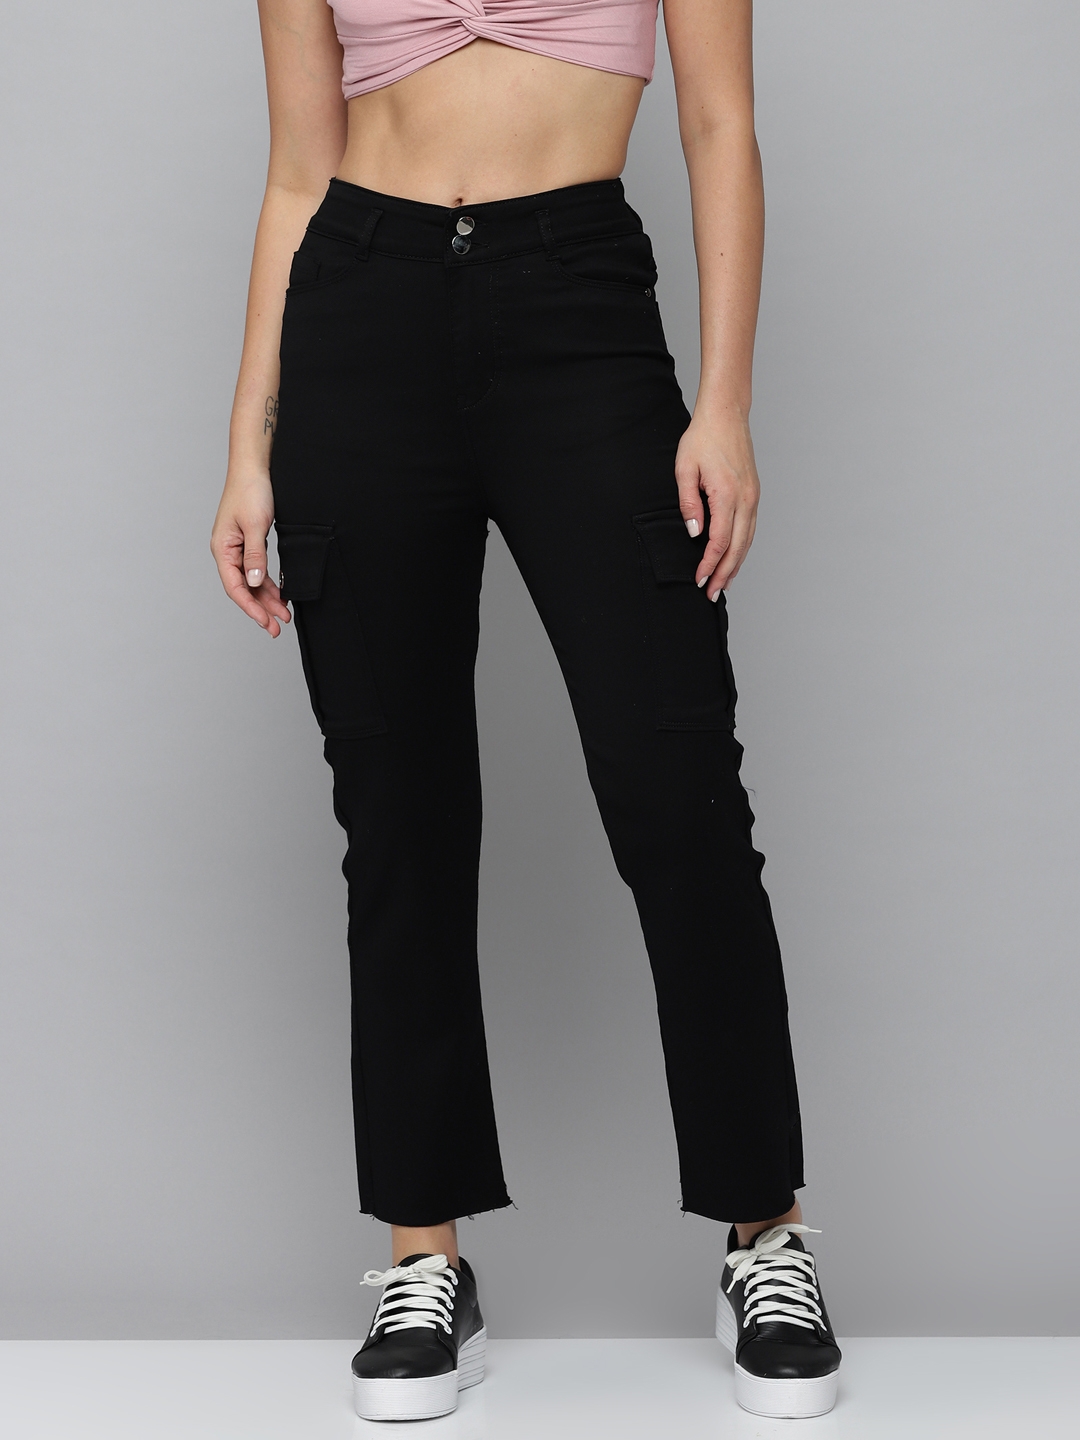 SHOWOFF Women's High-Rise Black Clean Look Jeans